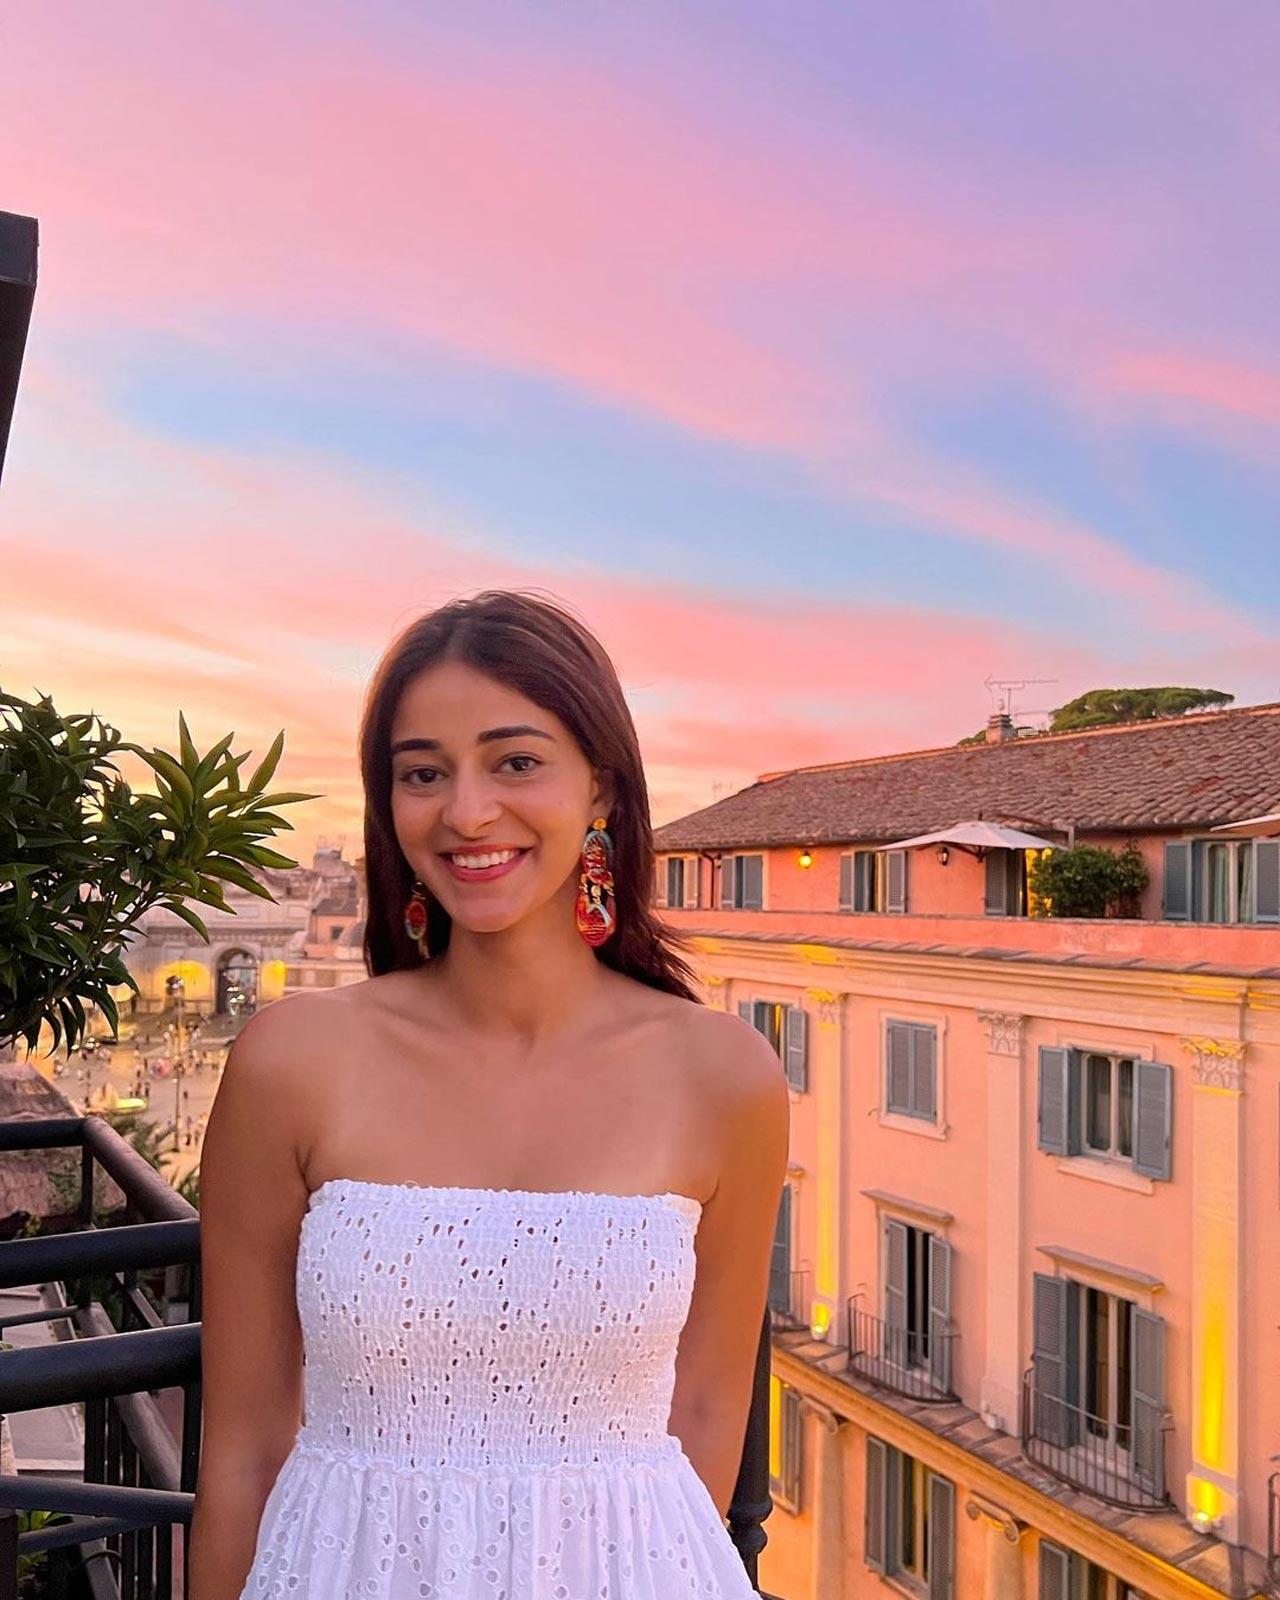 Ananya Panday is currently vacationing in Italy, and we can't get enough from her envious social media posts. Wearing a pretty white off-shoulder outfit, Ananya captioned the image, 